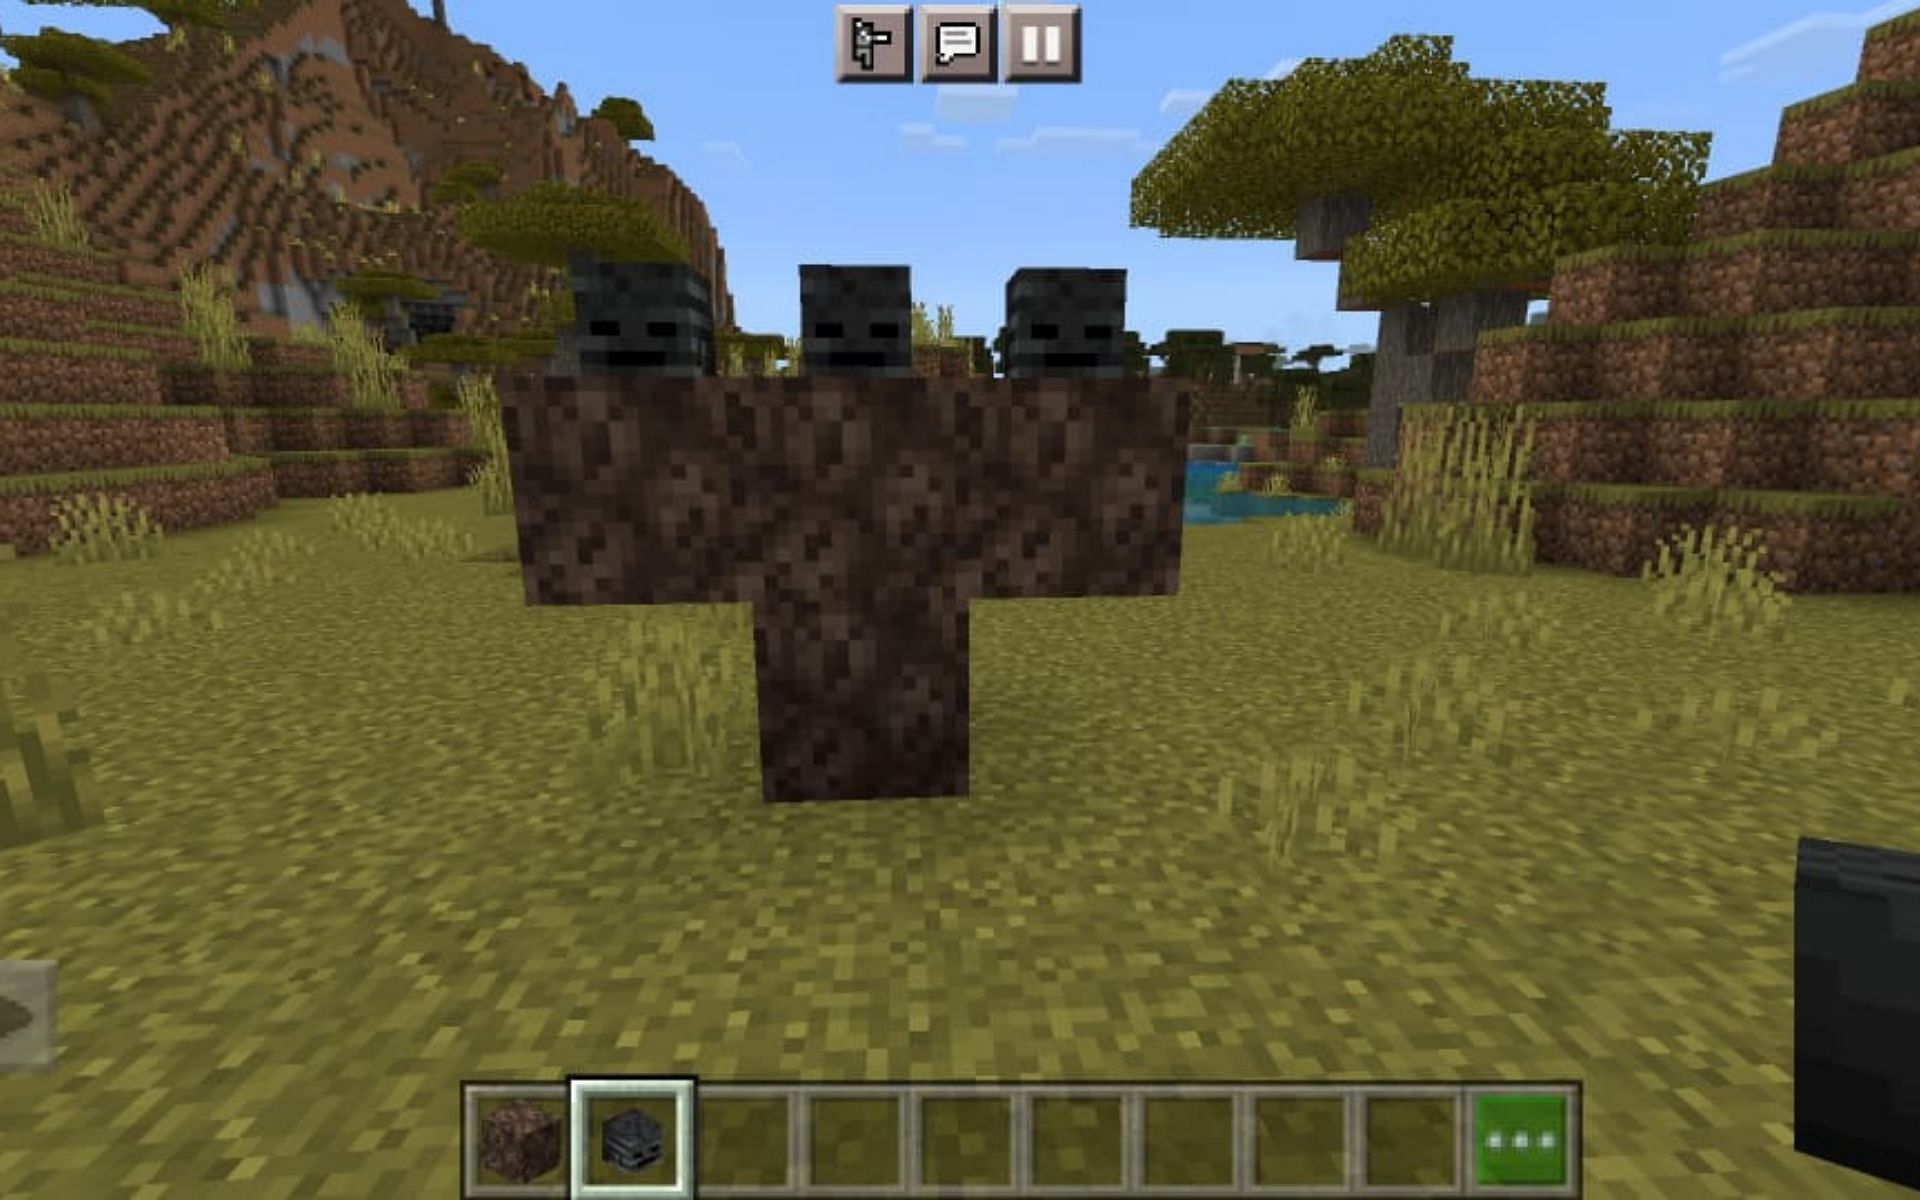 Arrangement of the soul sand and Wither skull to summon Wither (Image via Minecraft)